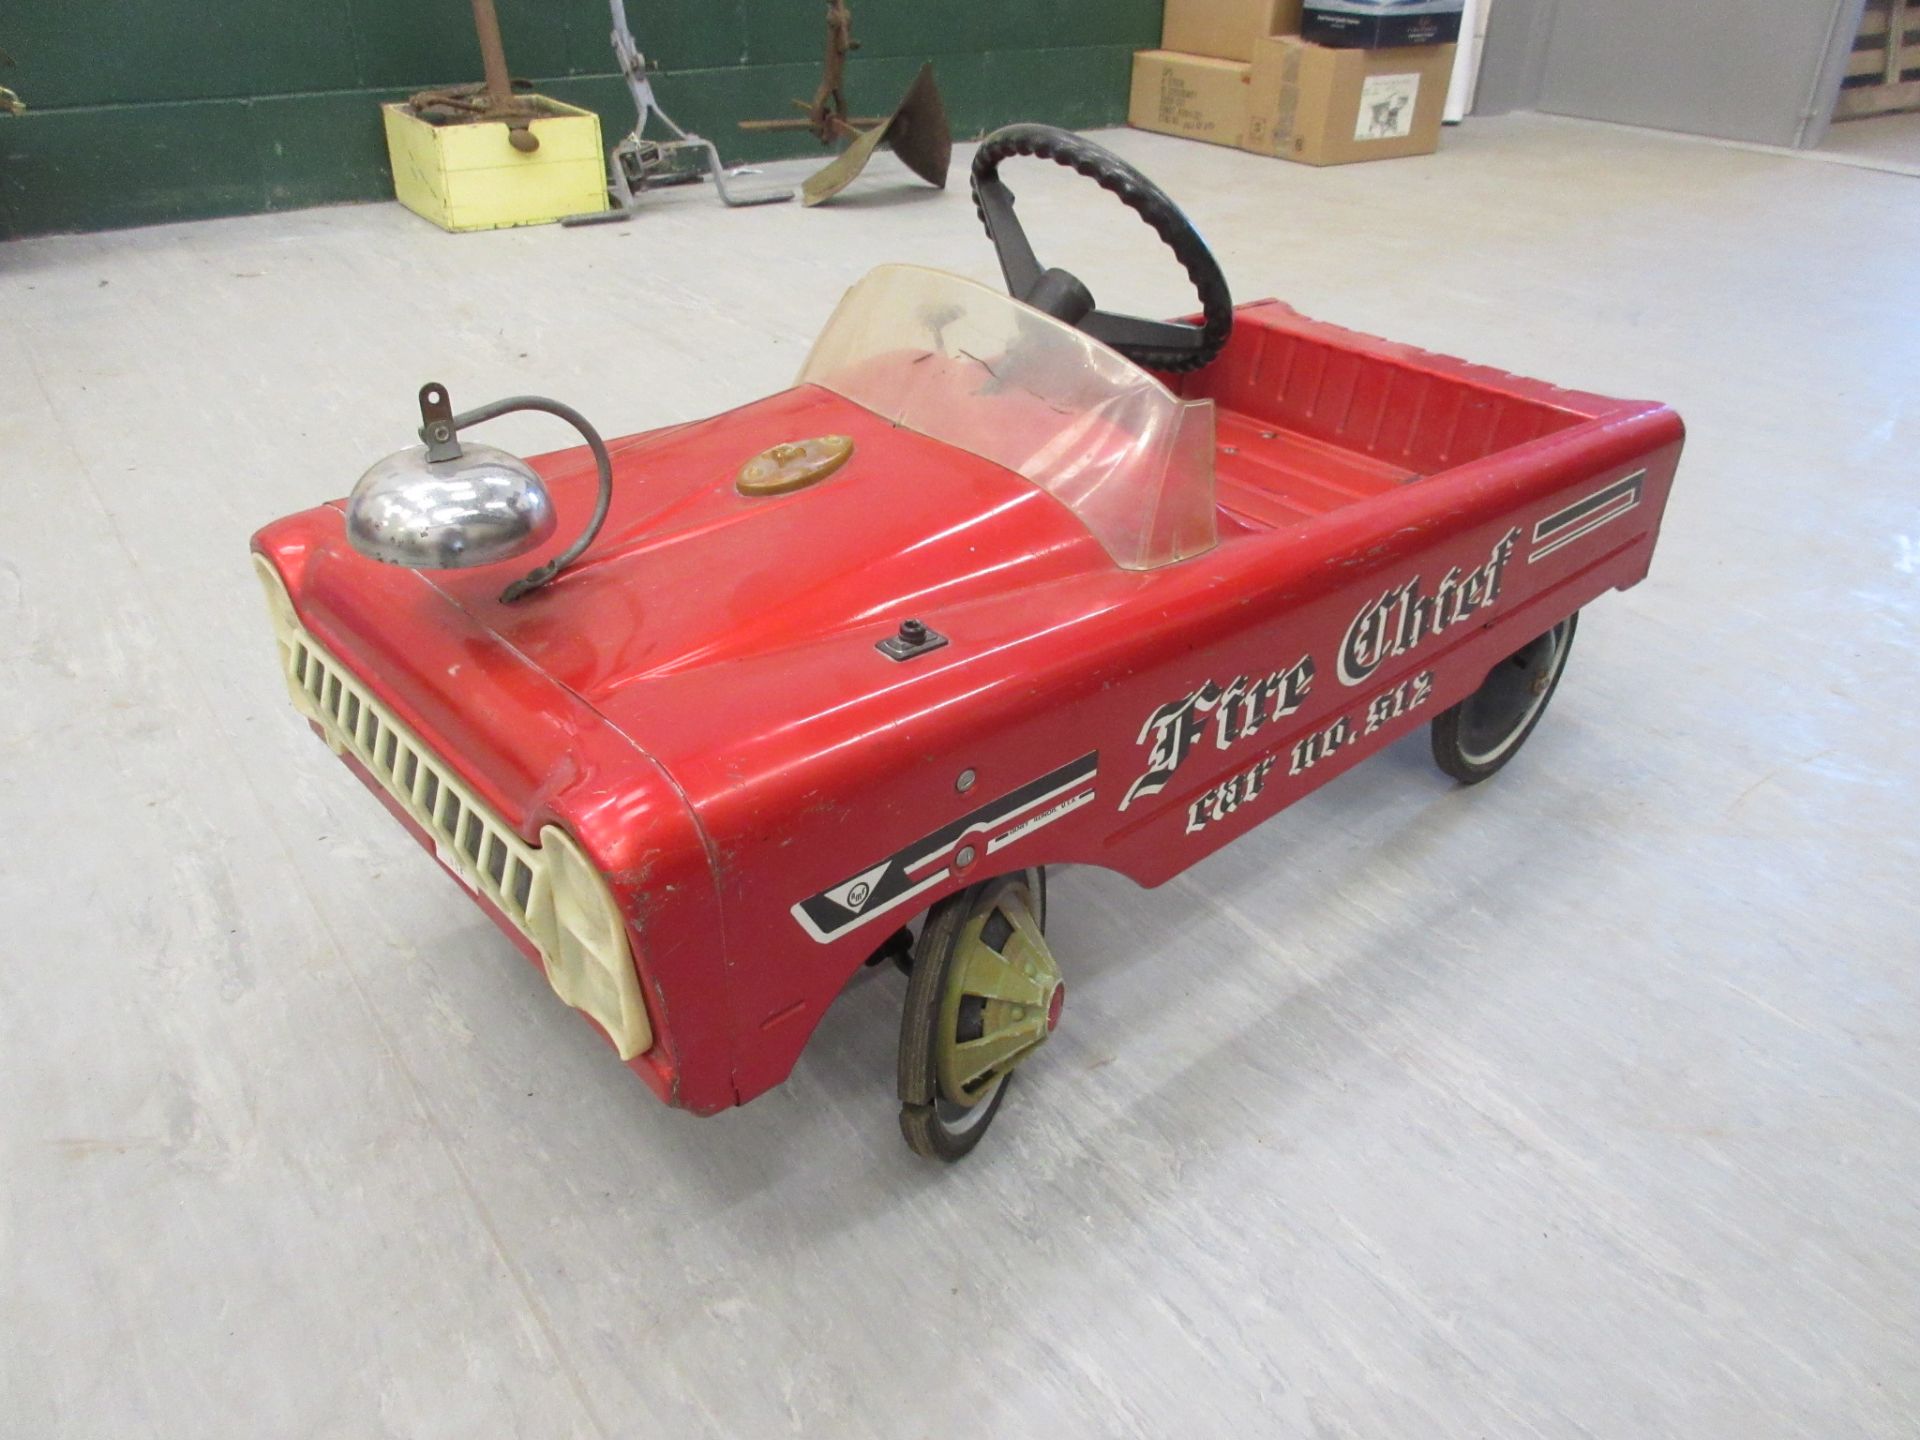 Child's metal pedal car sign written Fire Chief